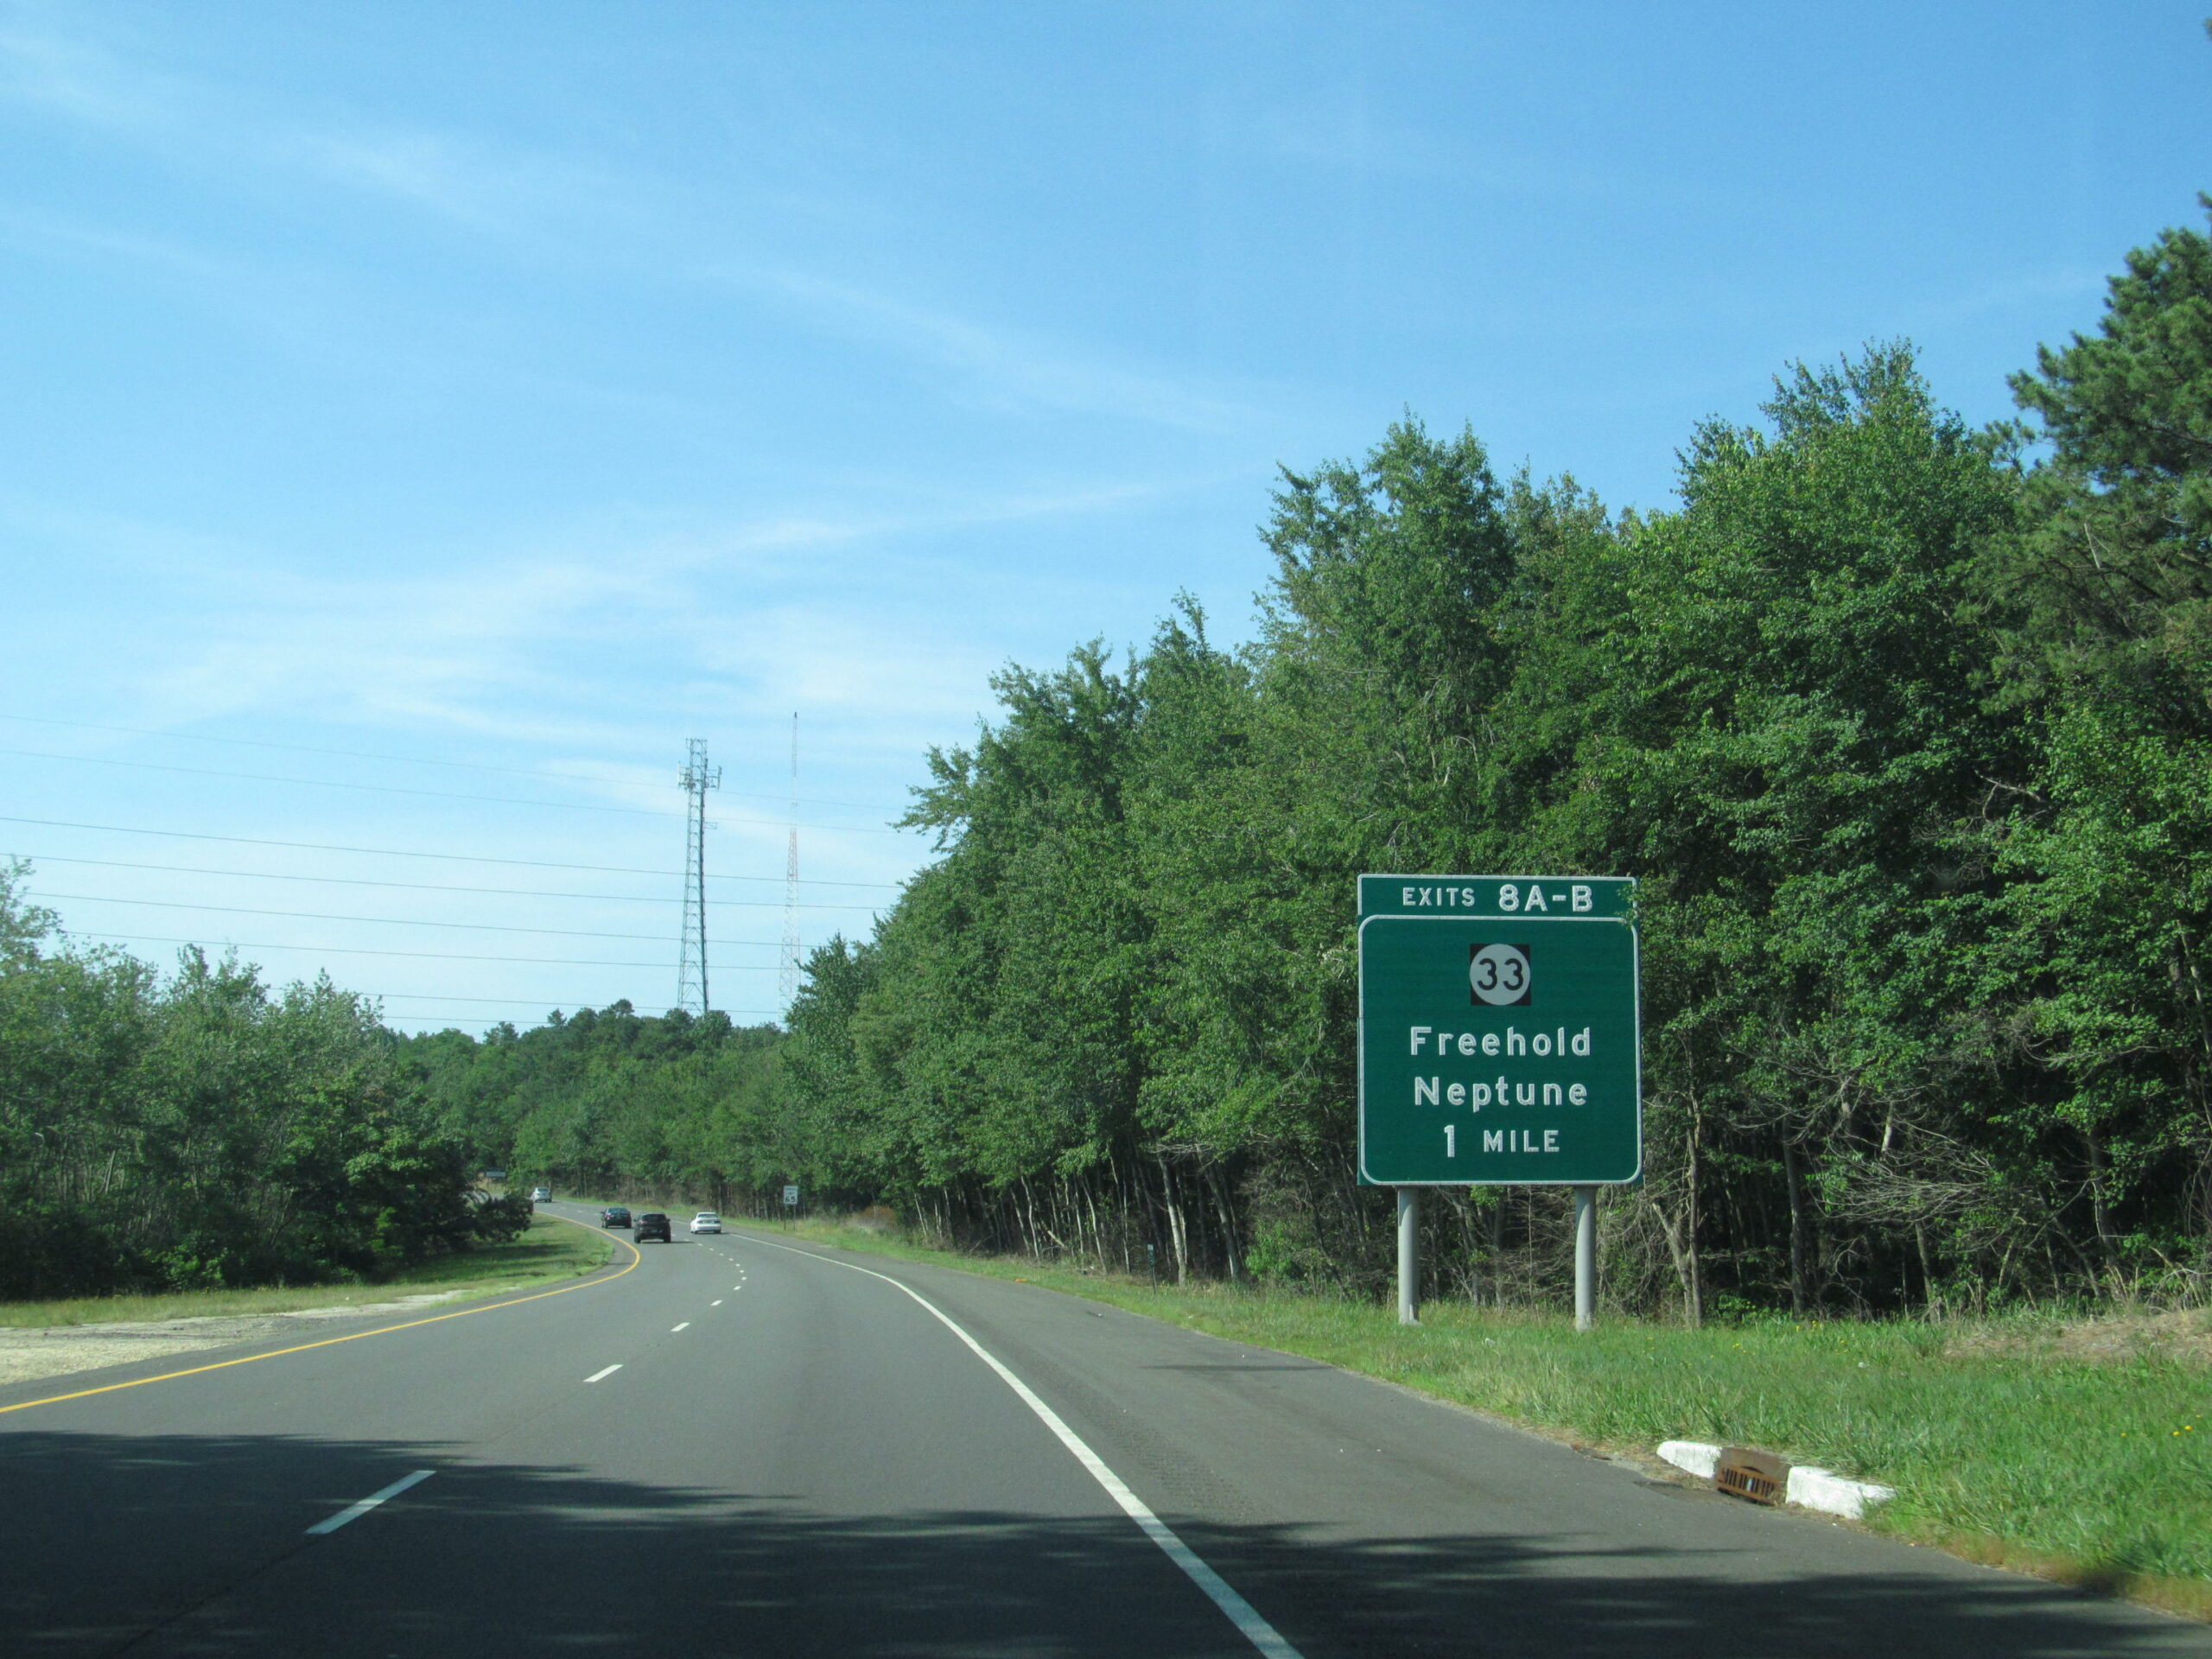 Road sign showing exit for Freehold and Neptune.